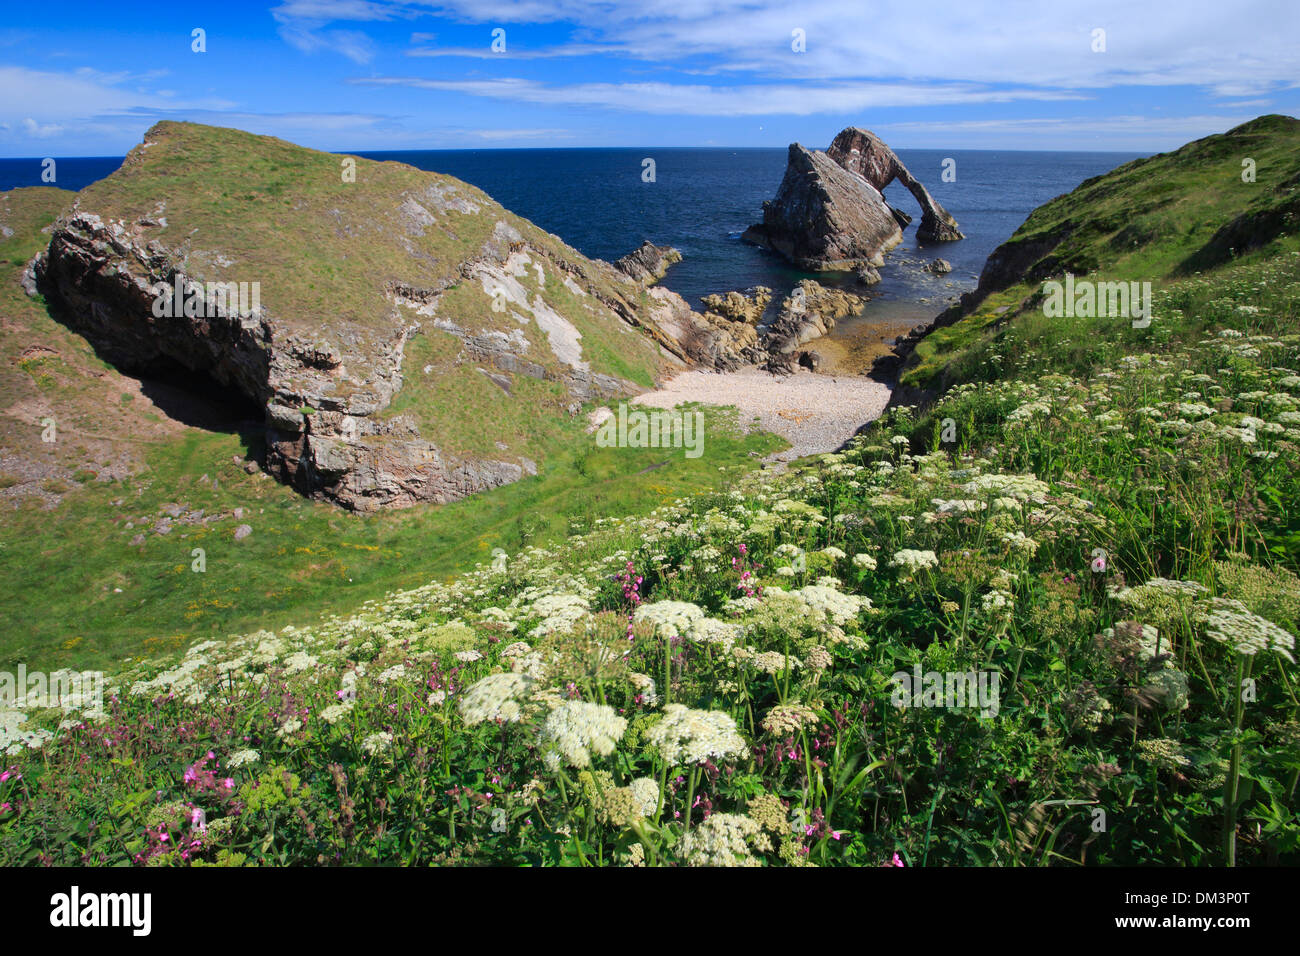 Arch flowers curves Bow Fiddle Bow Fiddle rock cliff cliff spring water Great Britain Europe cliffs coast scenery sea Moray Stock Photo